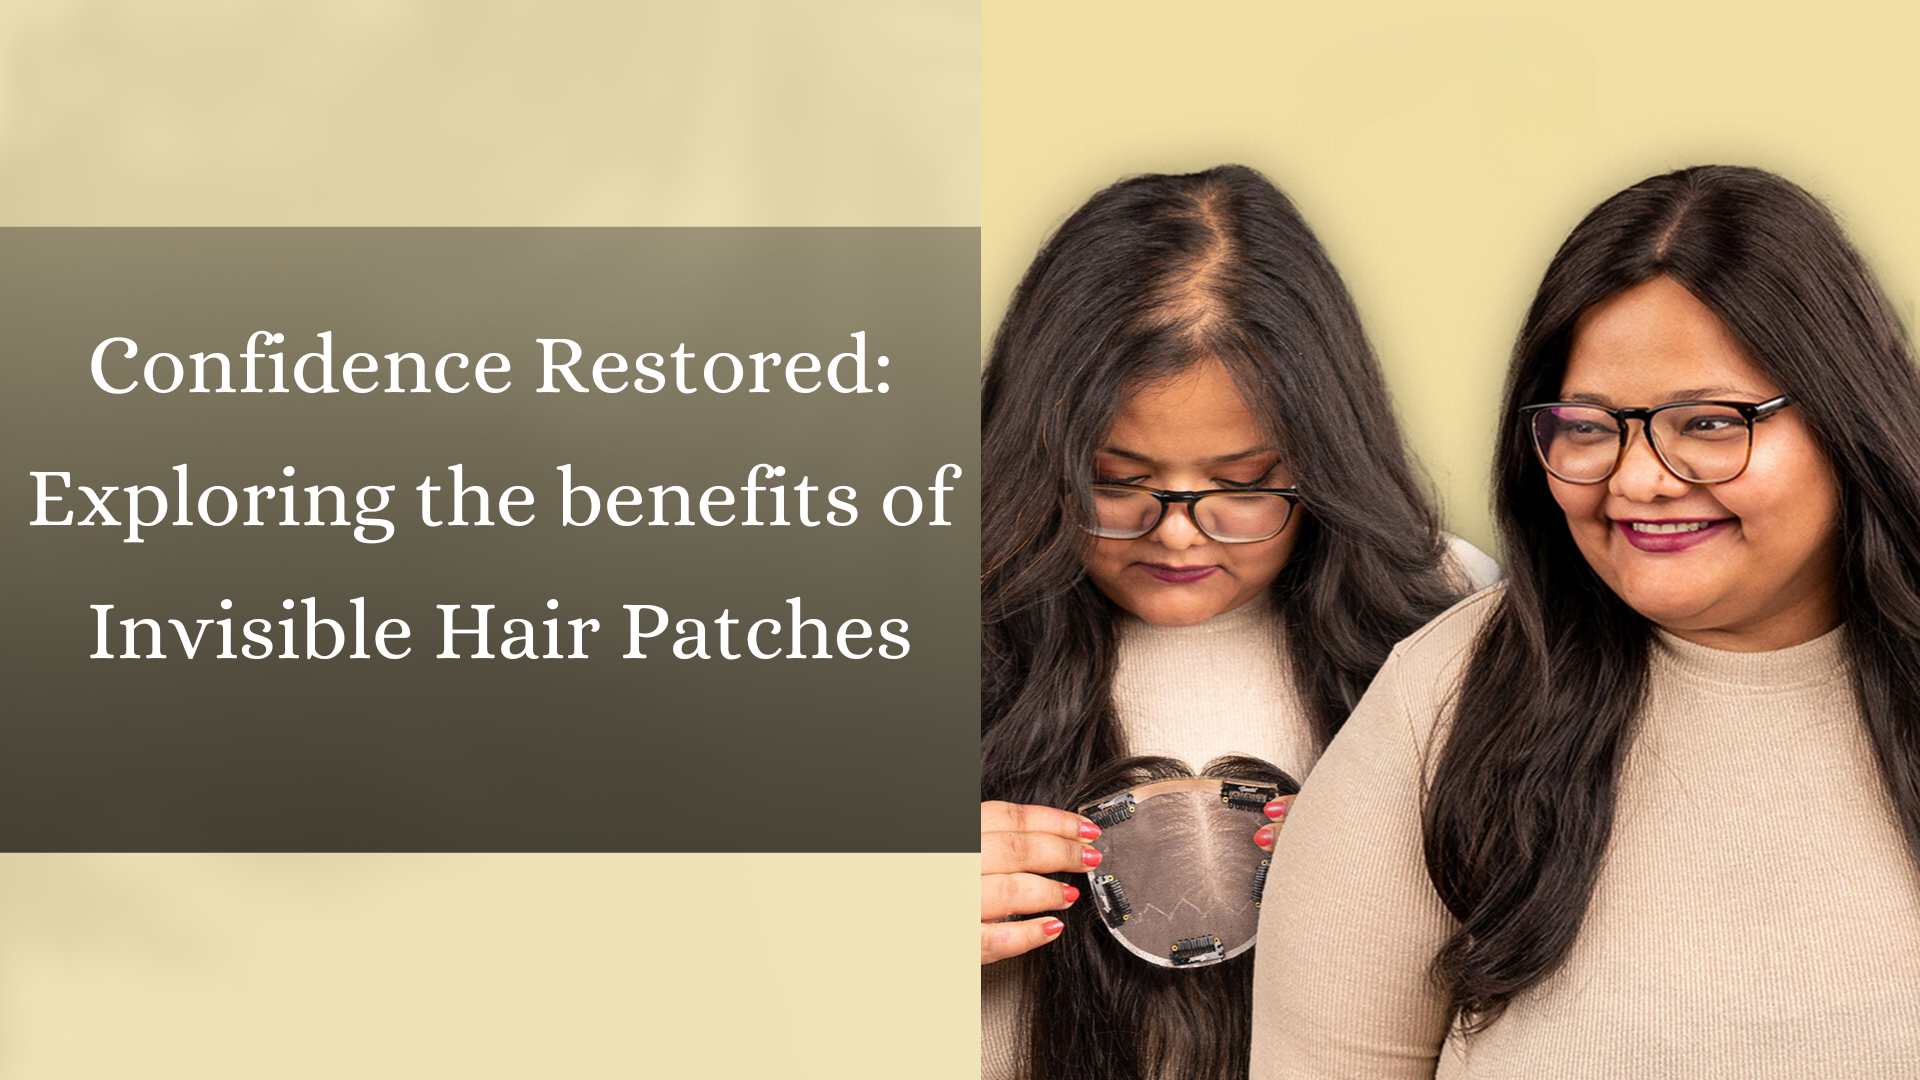 Confidence Restored: Exploring the Benefits of Invisible Hair Patches for Women